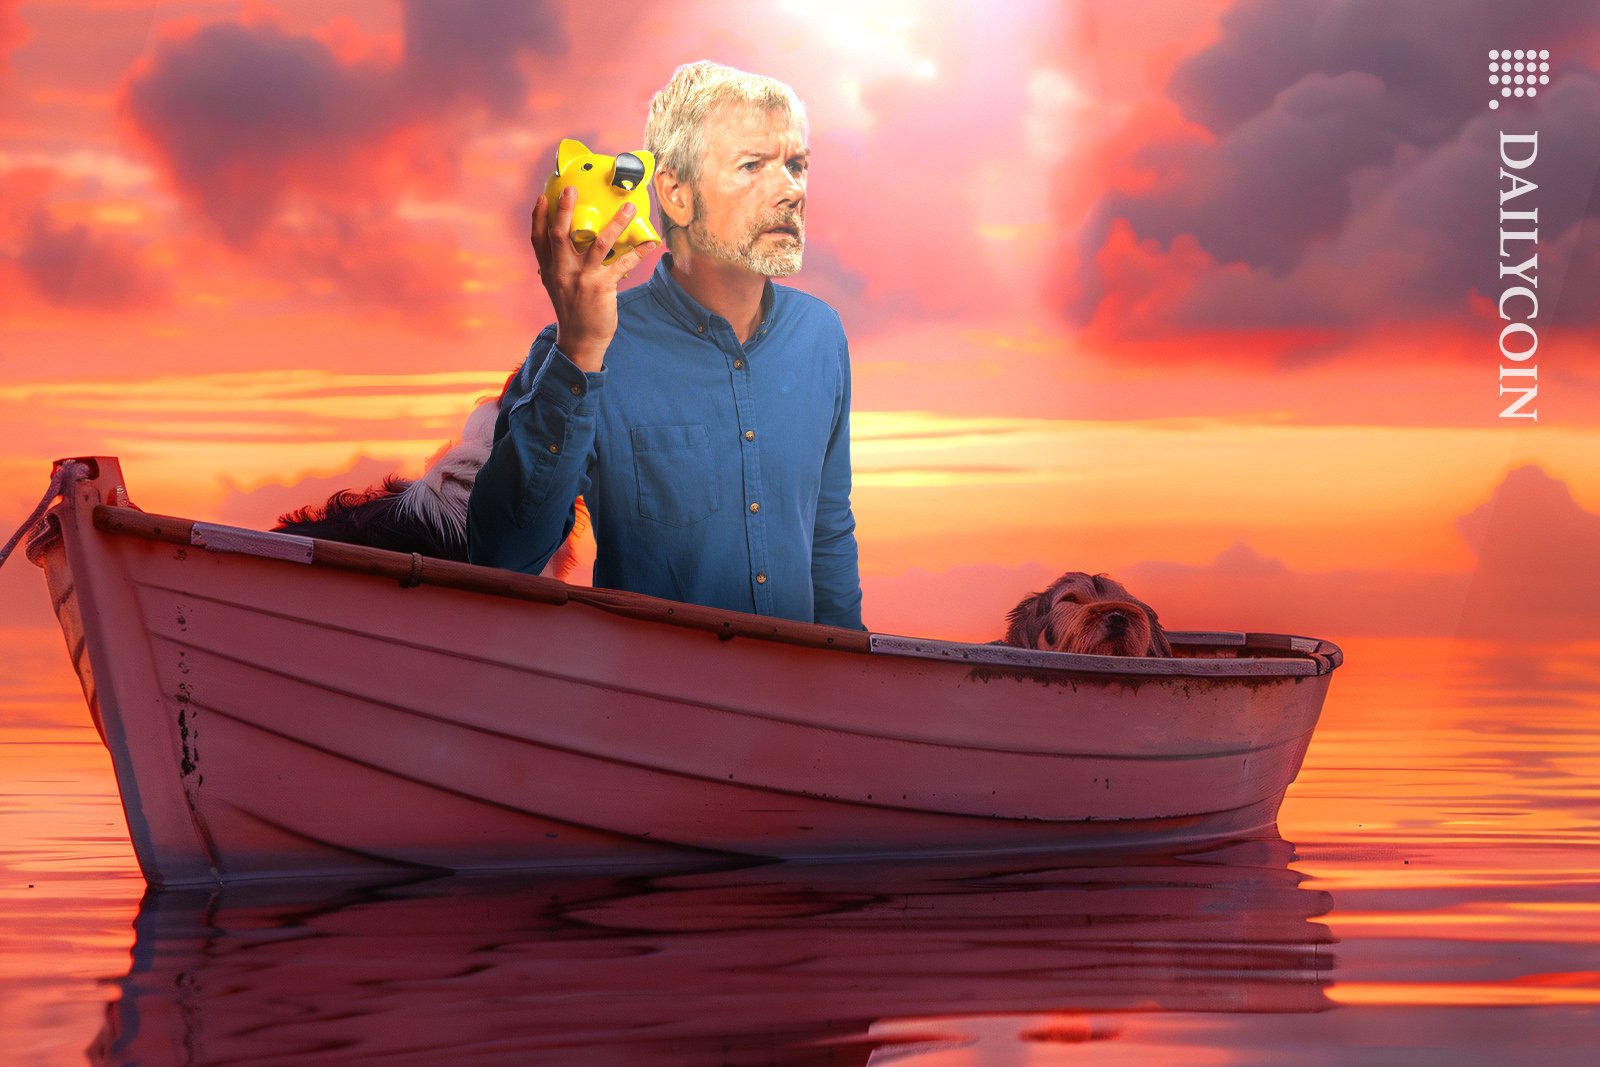 Michael Saylor on a boat holding up his piggy bank.